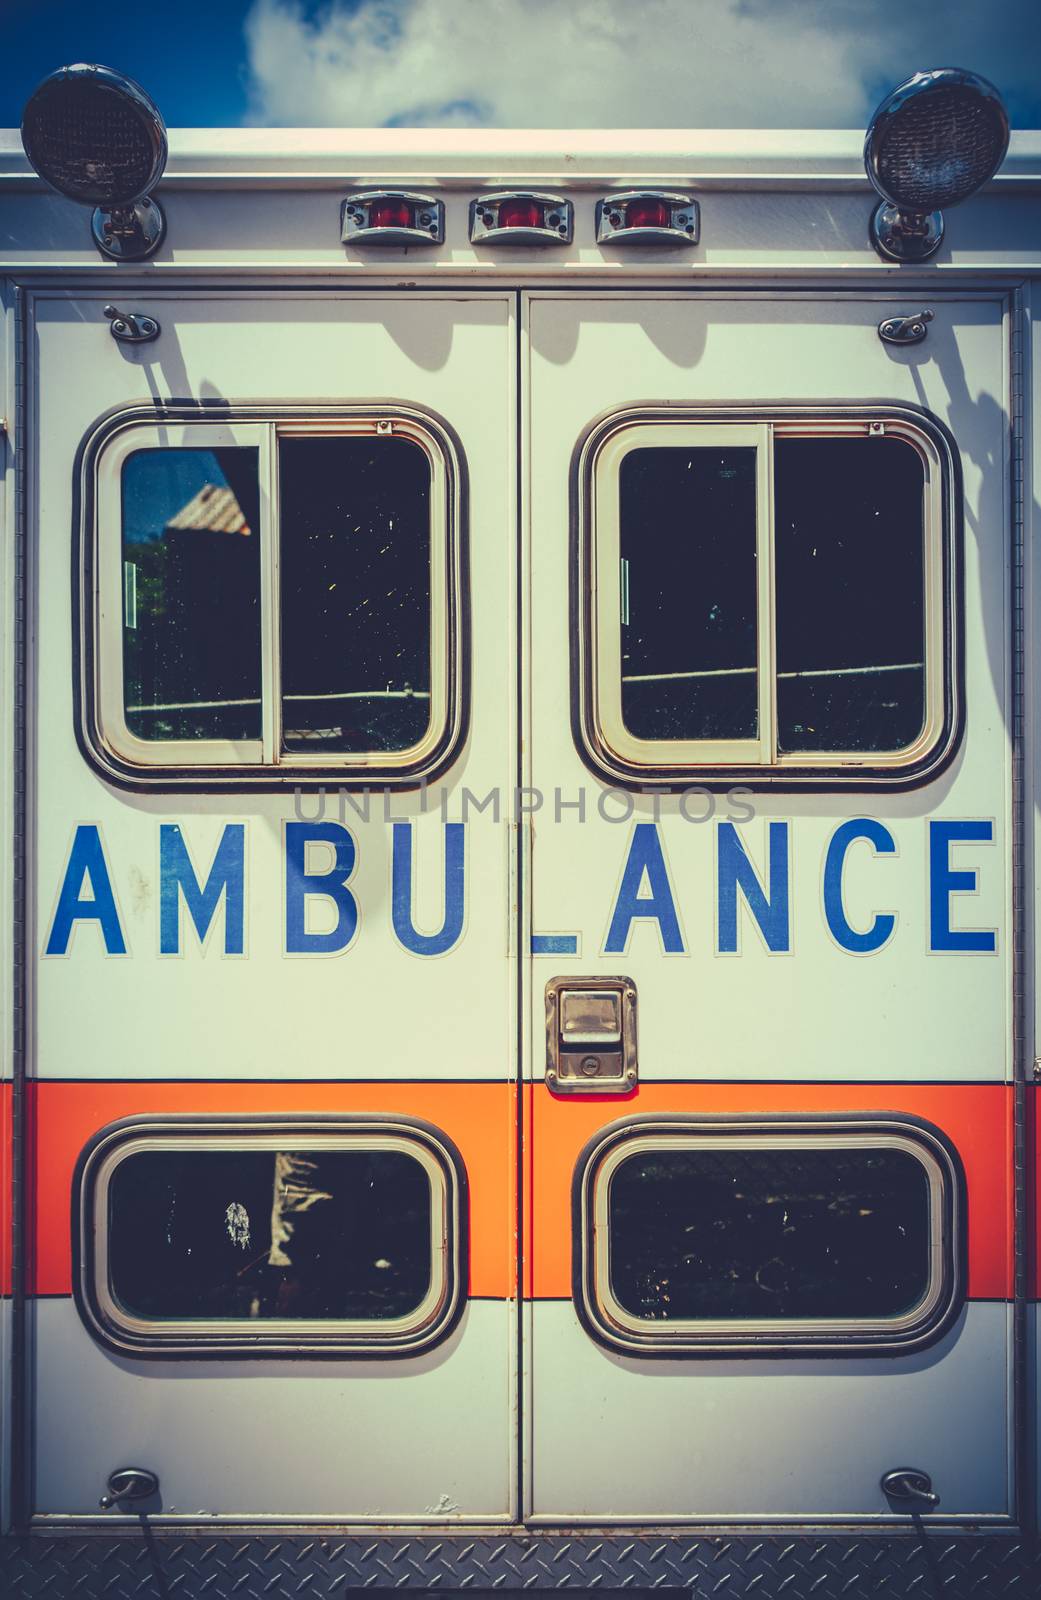 Retro Filtered Photo Of A Grungy Old Ambulance